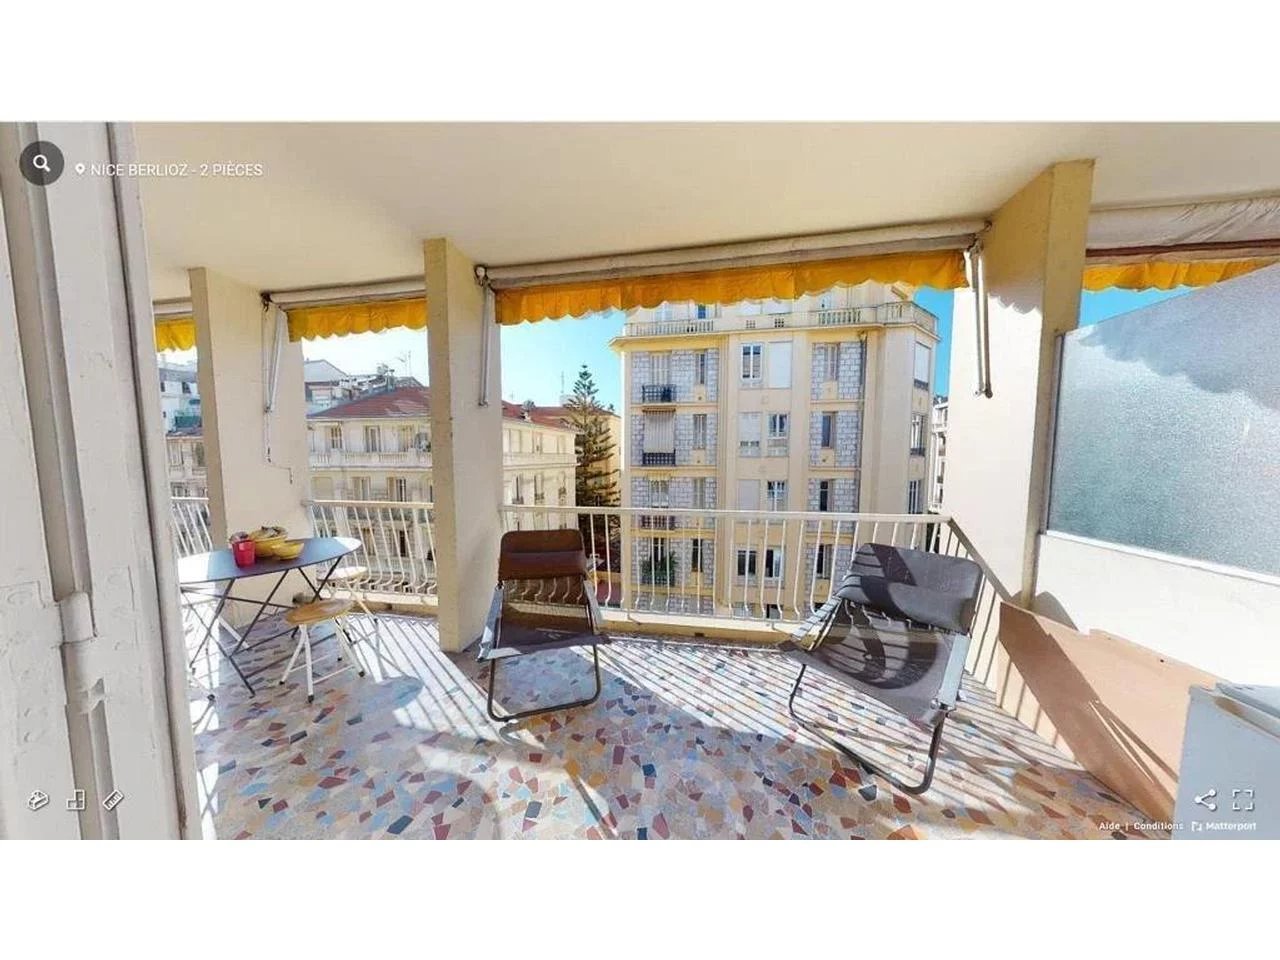 Appartement  2 Rooms 58.51m2  for sale   449 000 €